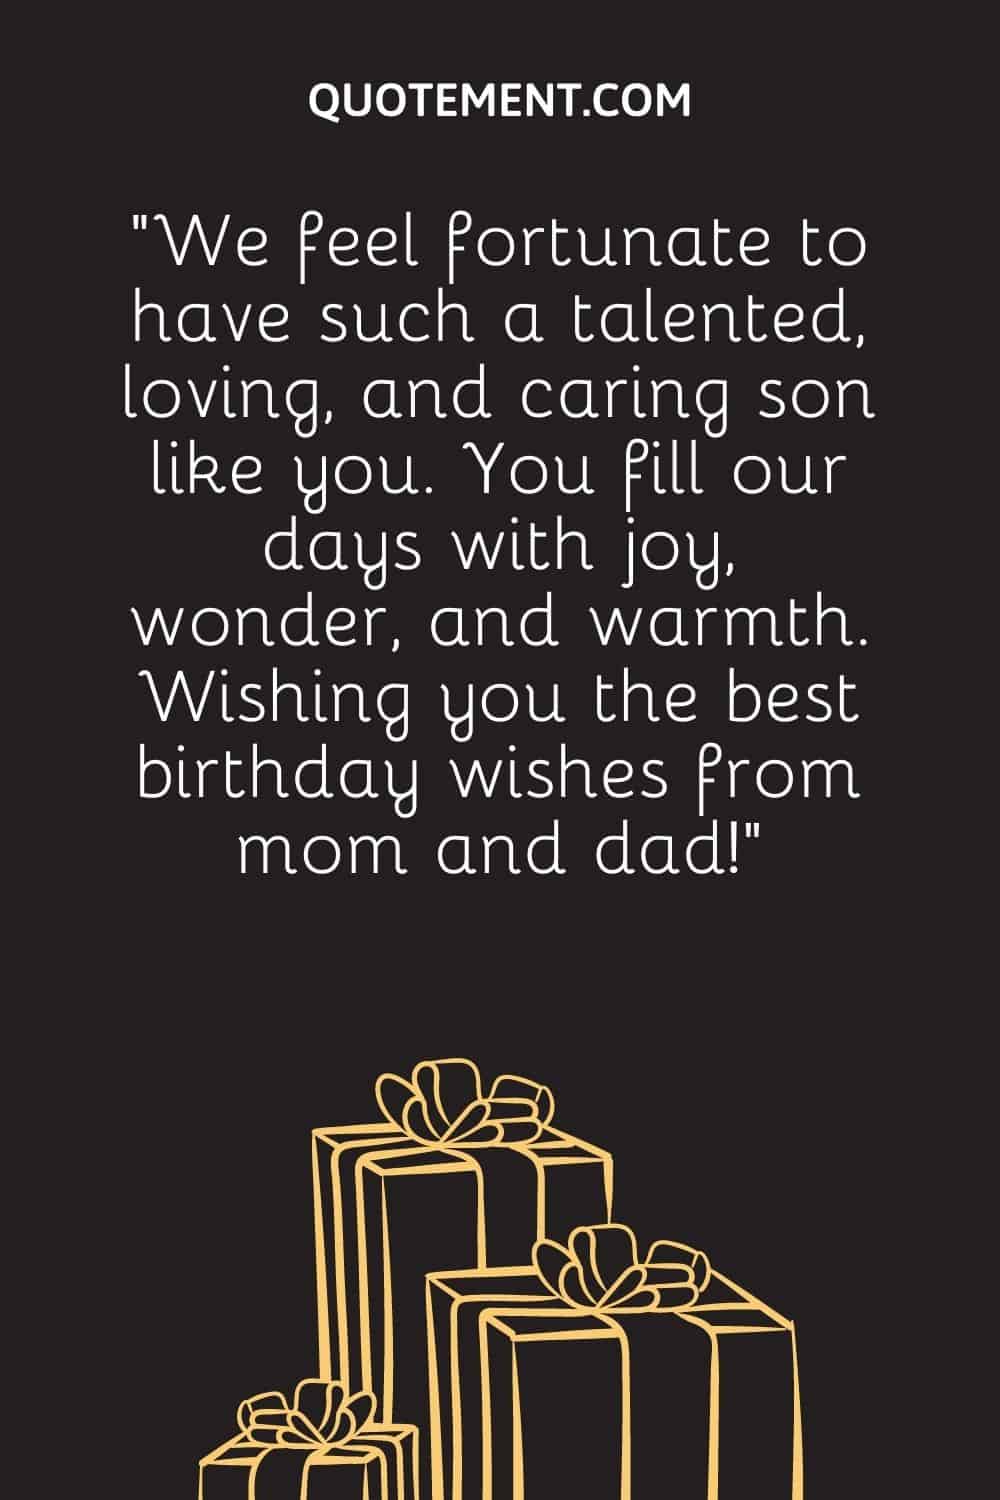 “We feel fortunate to have such a talented, loving, and caring son like you. You fill our days with joy, wonder, and warmth. Wishing you the best birthday wishes from mom and dad!”